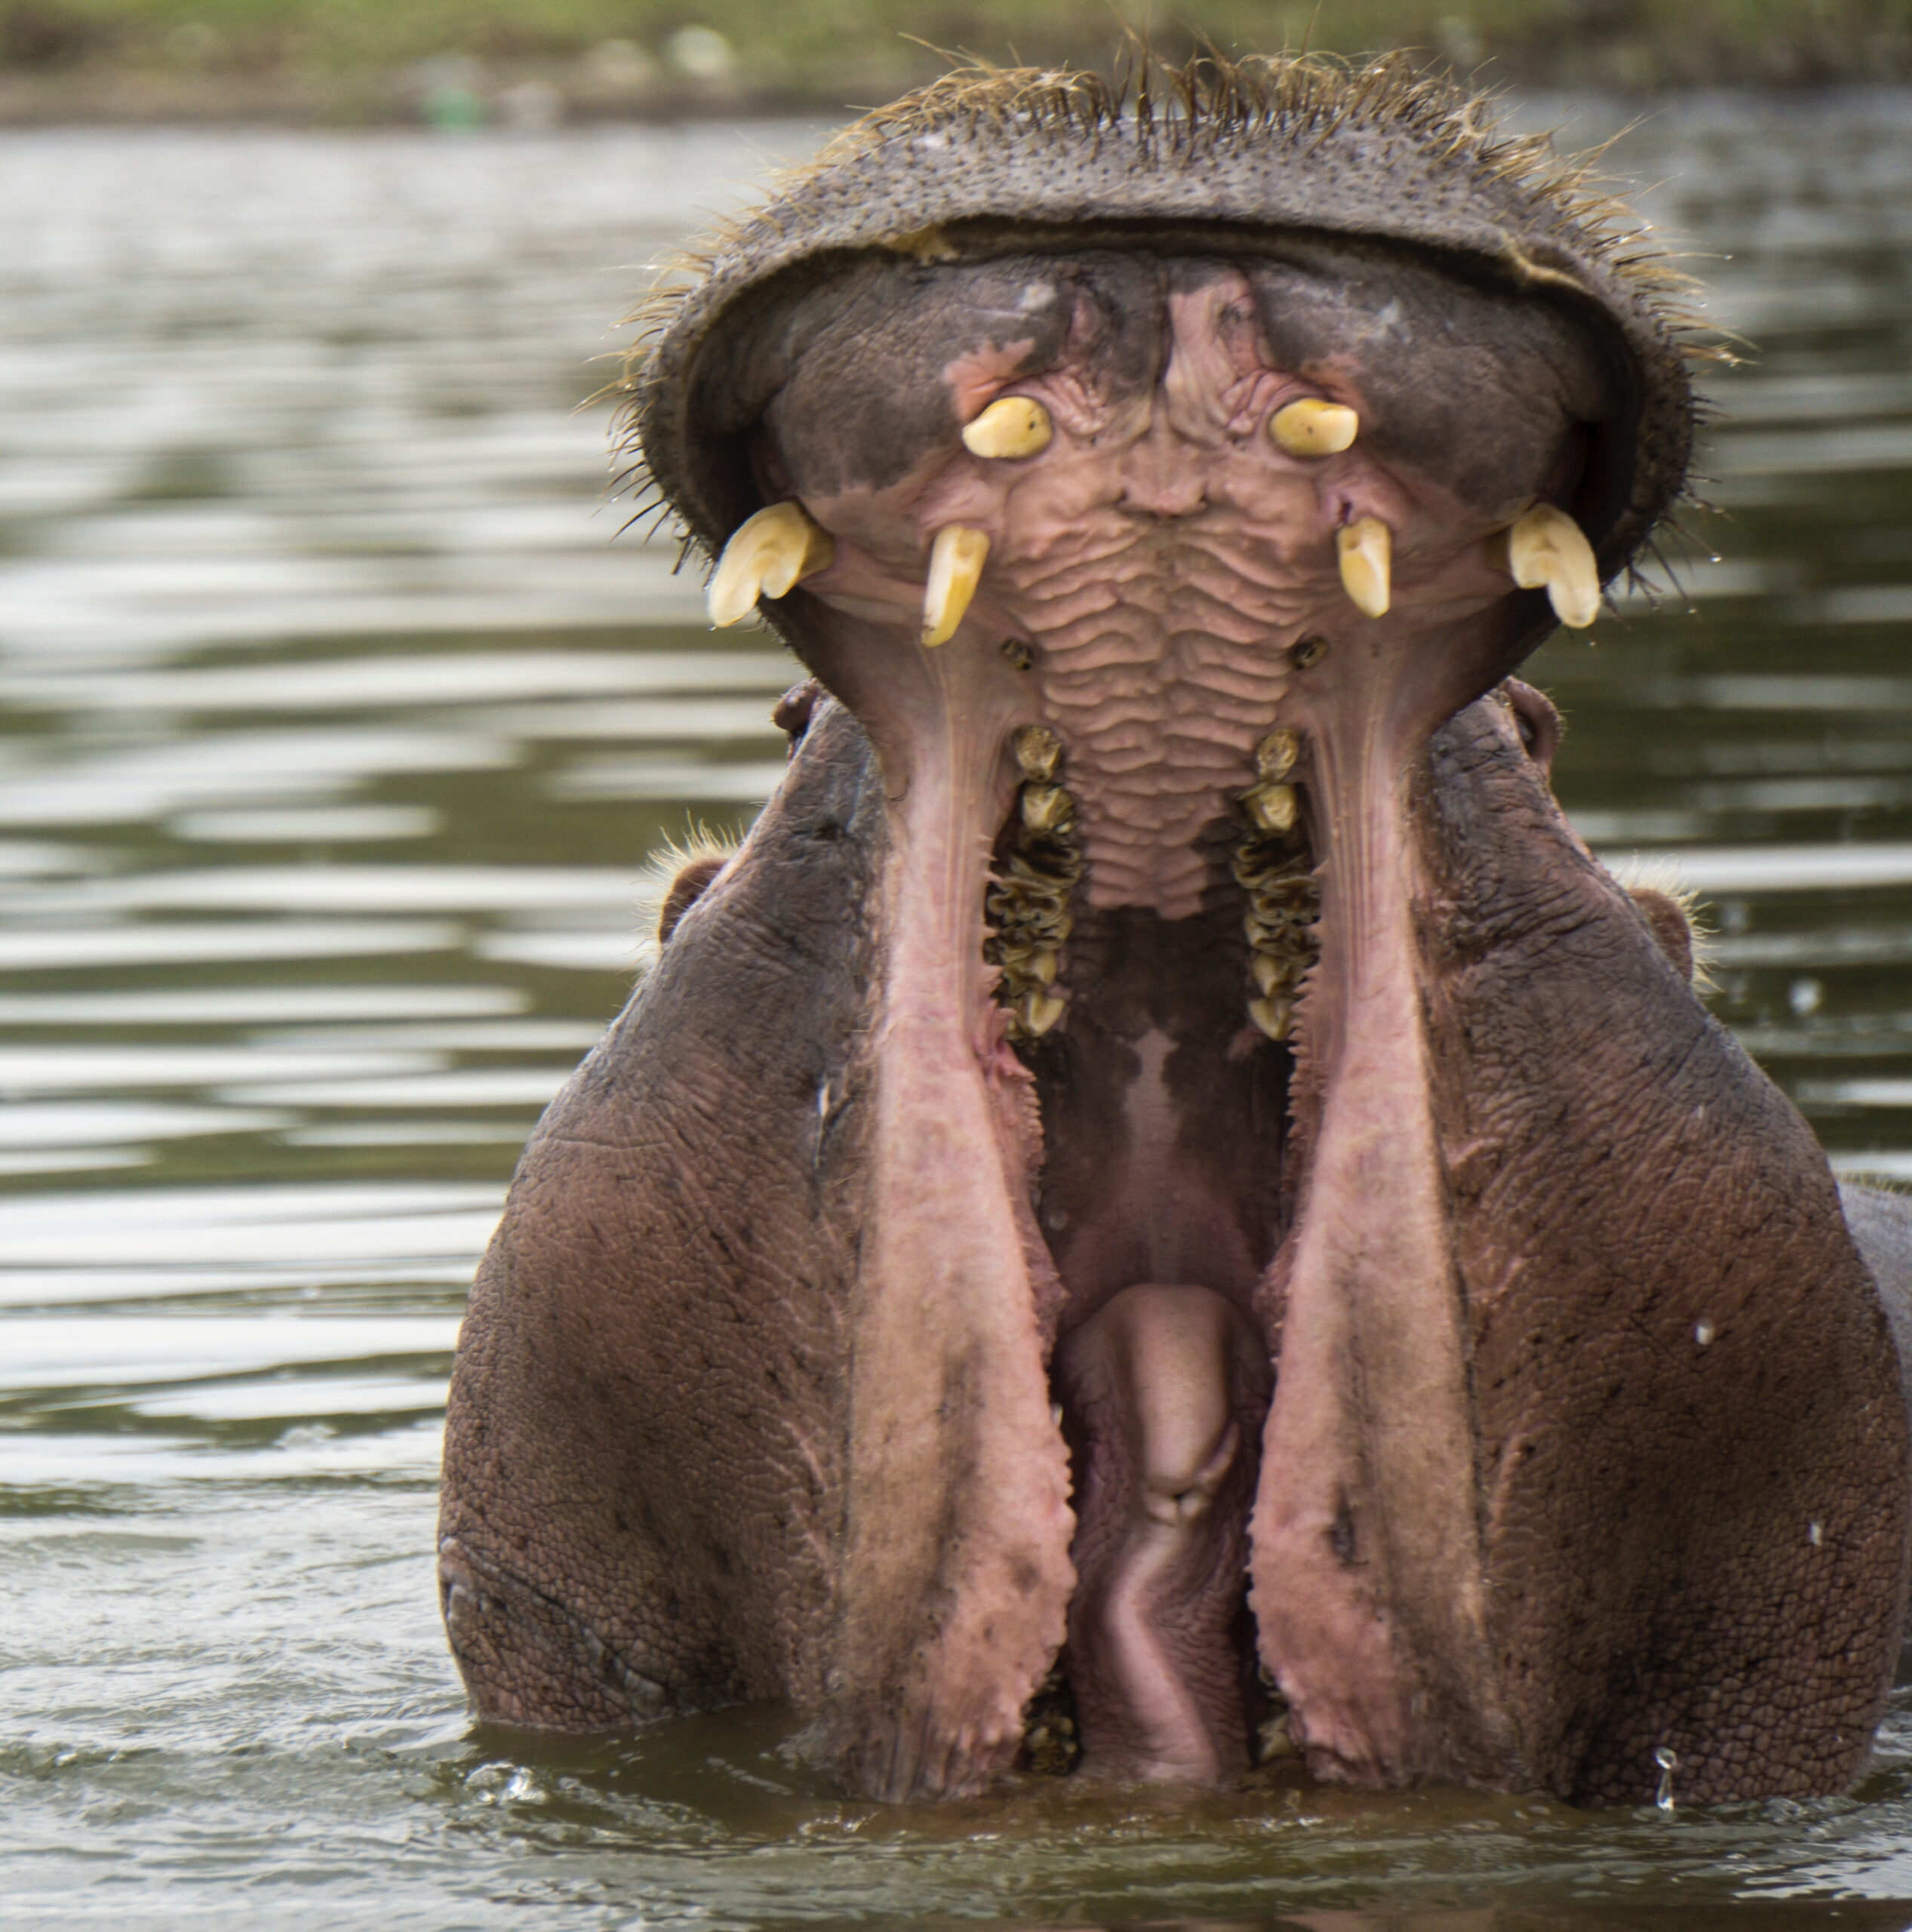 Hungry hippo. Photo by Julie Wolpers.